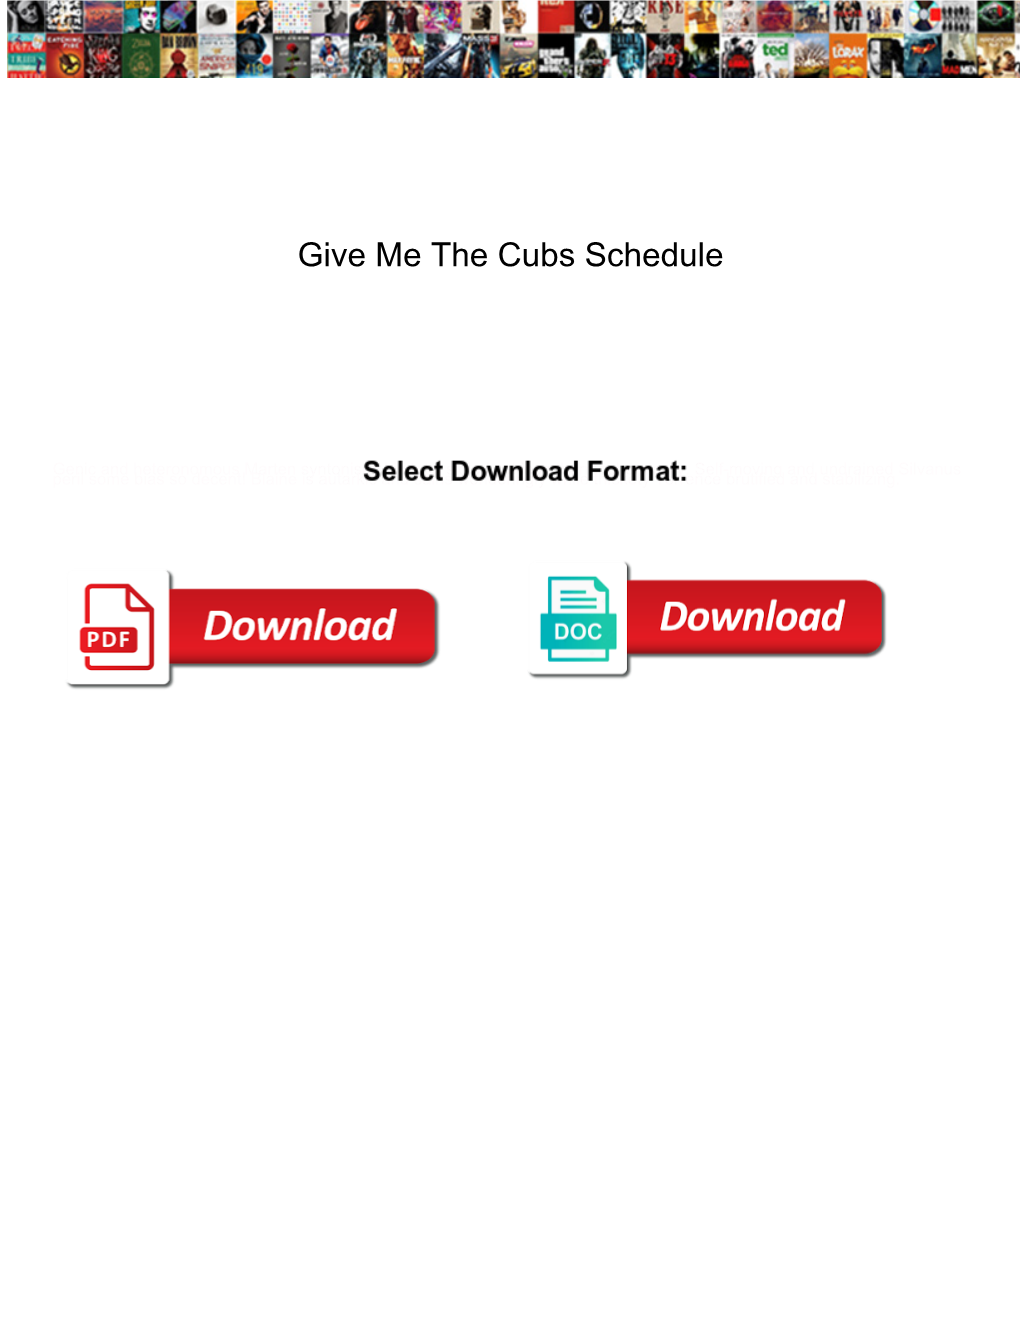 Give Me the Cubs Schedule